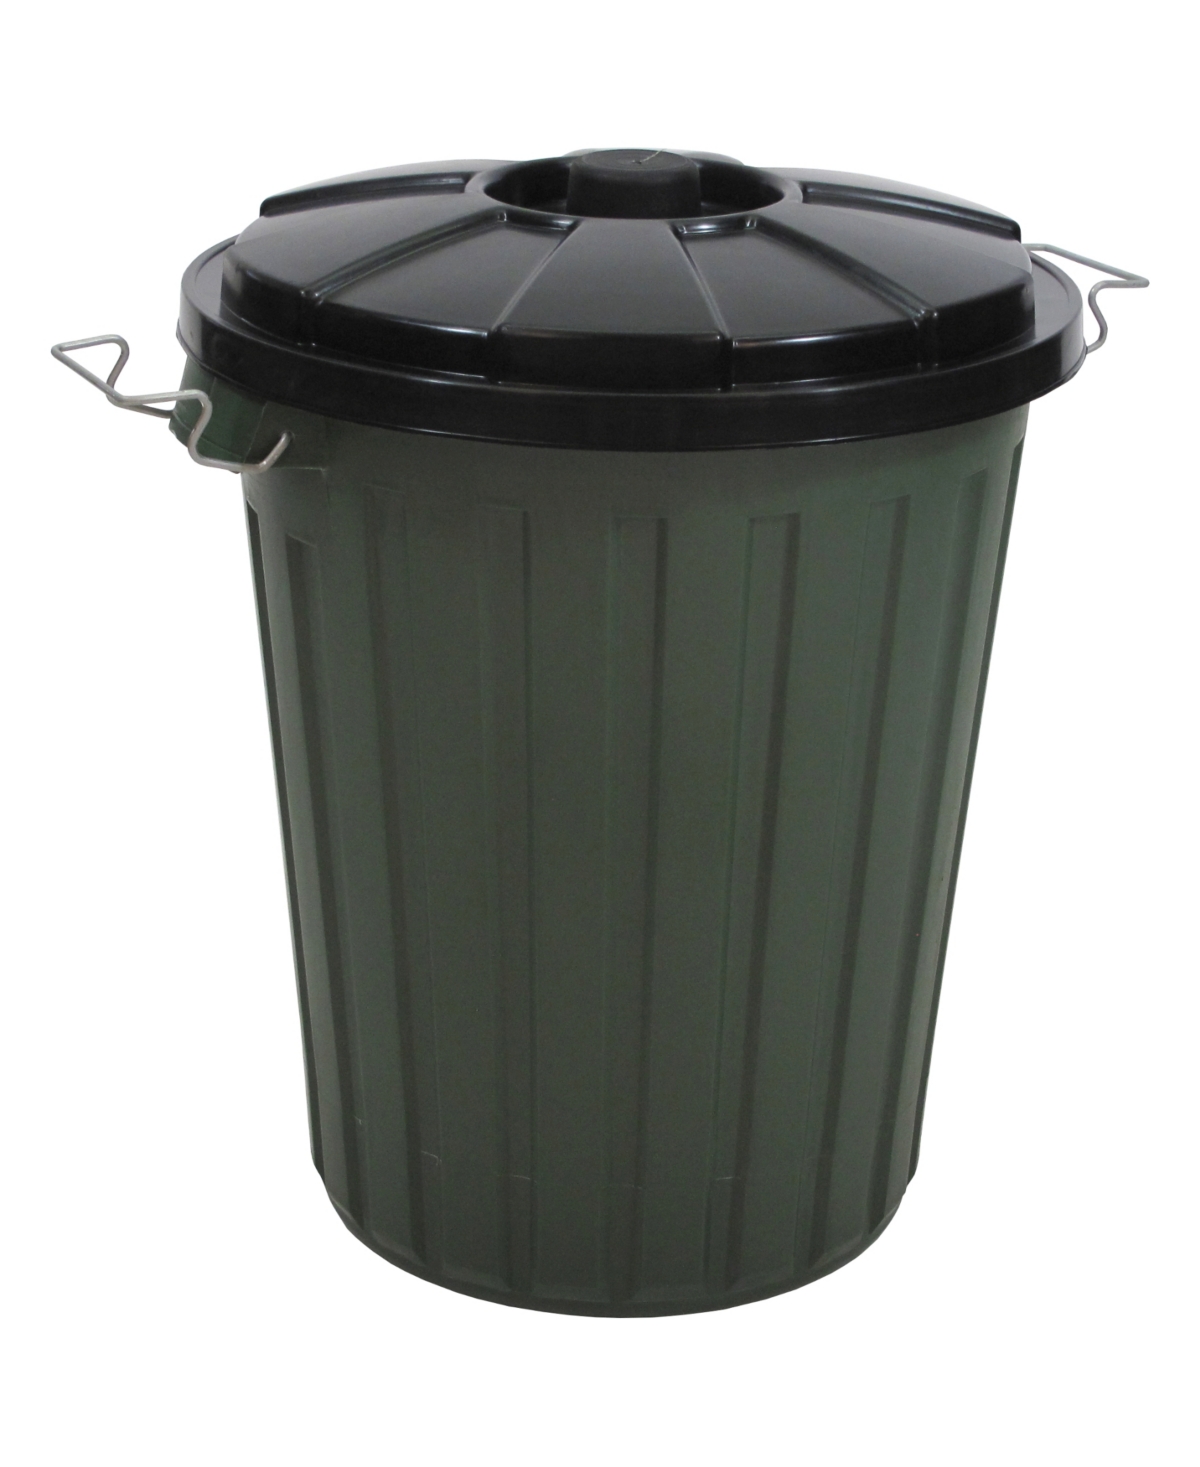 13.2 Gallon Garbage Bin with Latch on Lid - Green